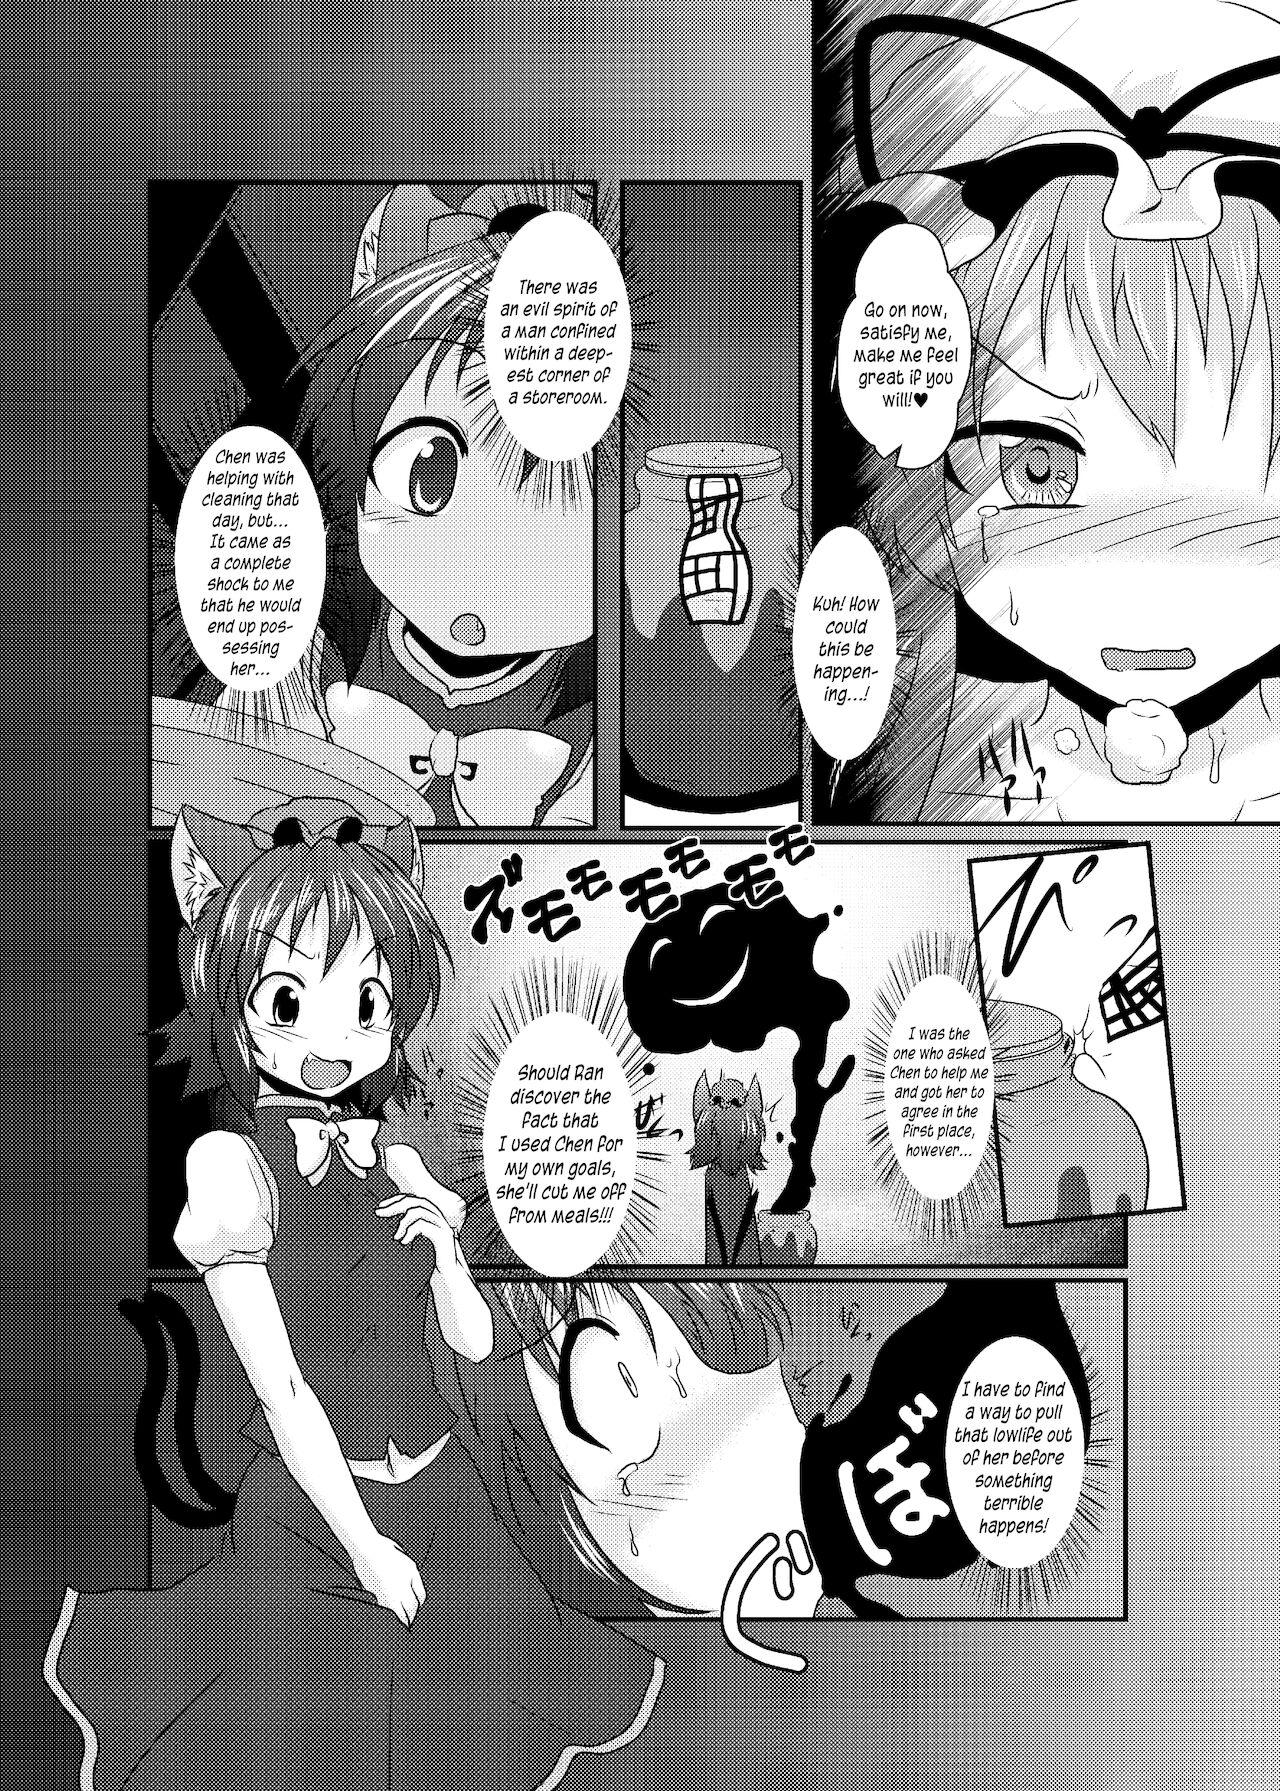 Curves Chotto Tsukarechatta Mitai | I think I'm a little possessed! - Touhou project HD - Page 4